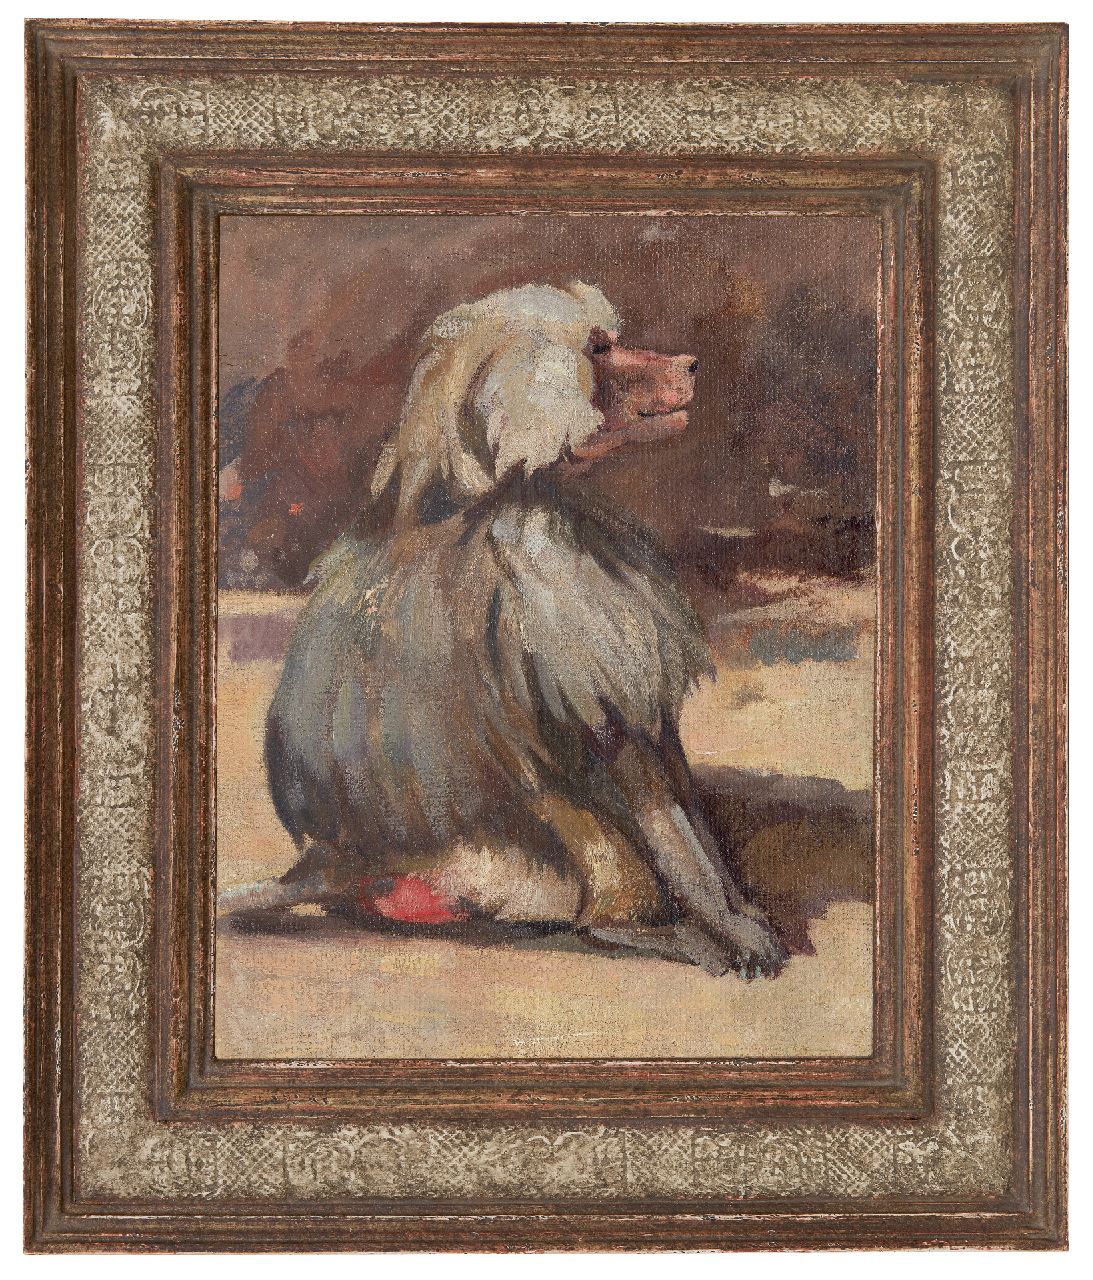 Bruigom M.C.  | Margaretha Cornelia 'Greta' Bruigom | Paintings offered for sale | Mantle baboon, oil on canvas laid down on panel 36.5 x 28.7 cm, signed on the reverso